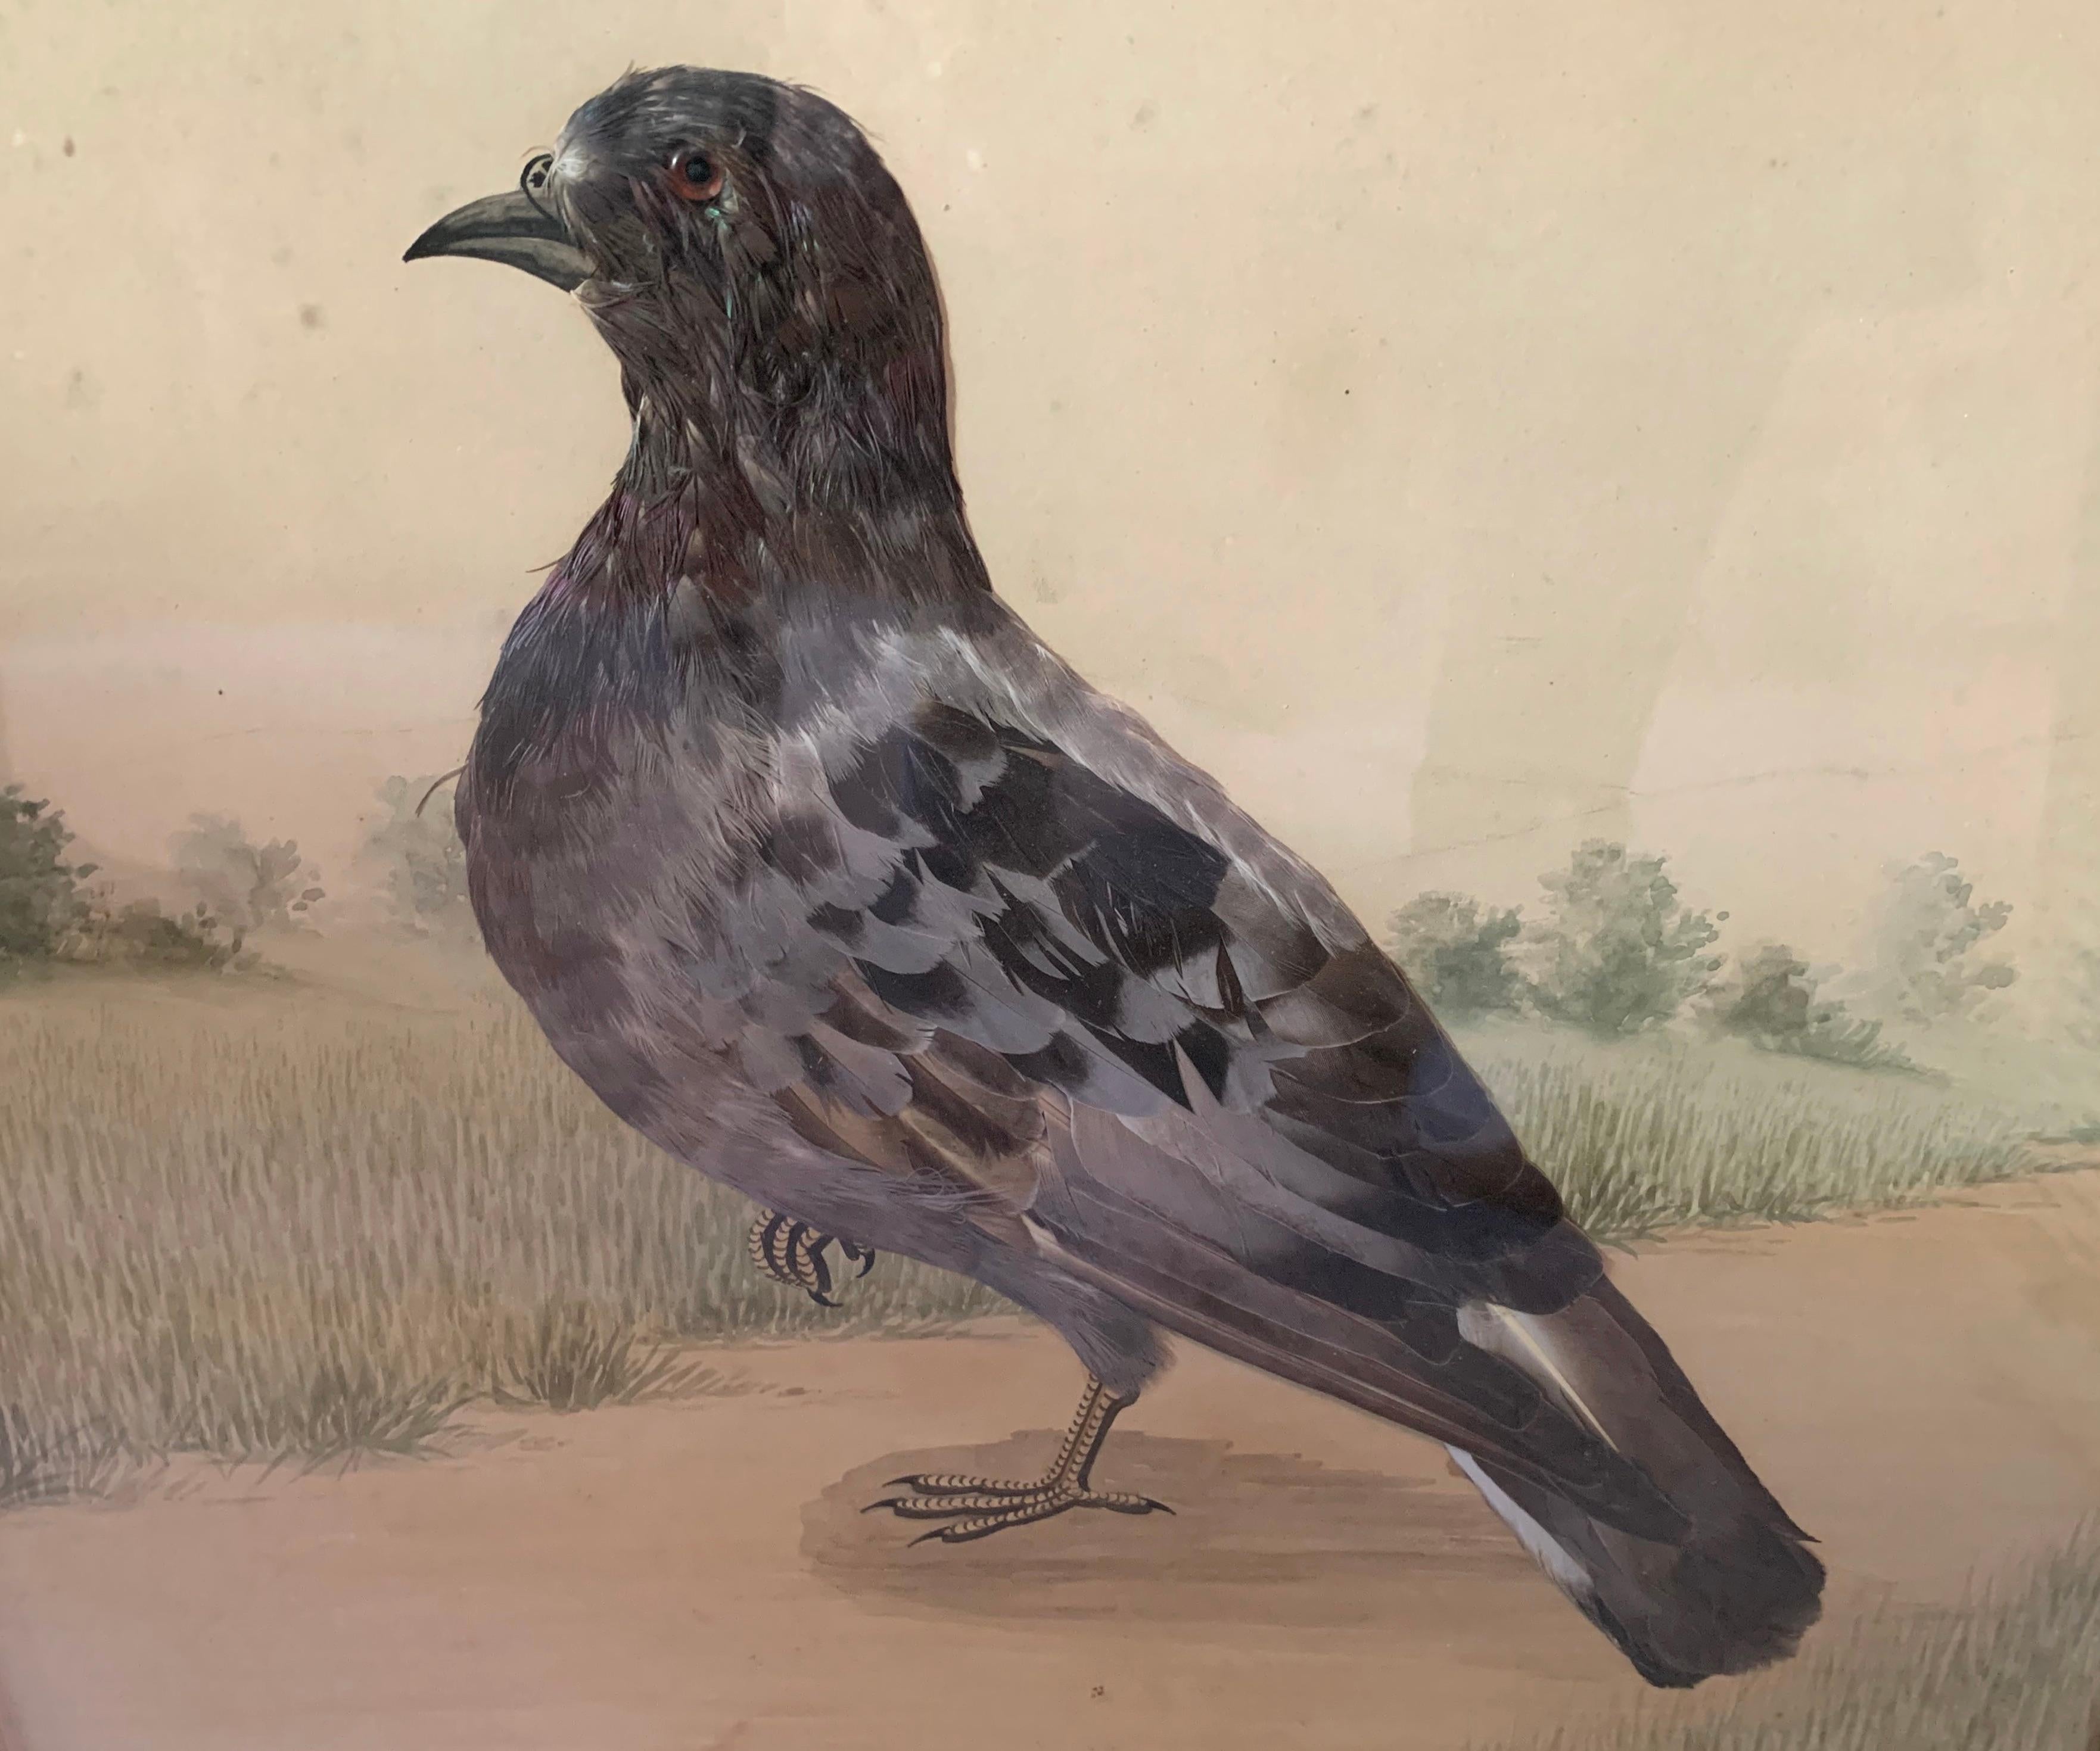 This charming Victorian watercolor with the delicate collage of a pigeon has been hand painted in the second half of the 19th century. The pigeon, made entirely out of feathers, is standing on a sandy path leading through a heath with bushes, shrubs